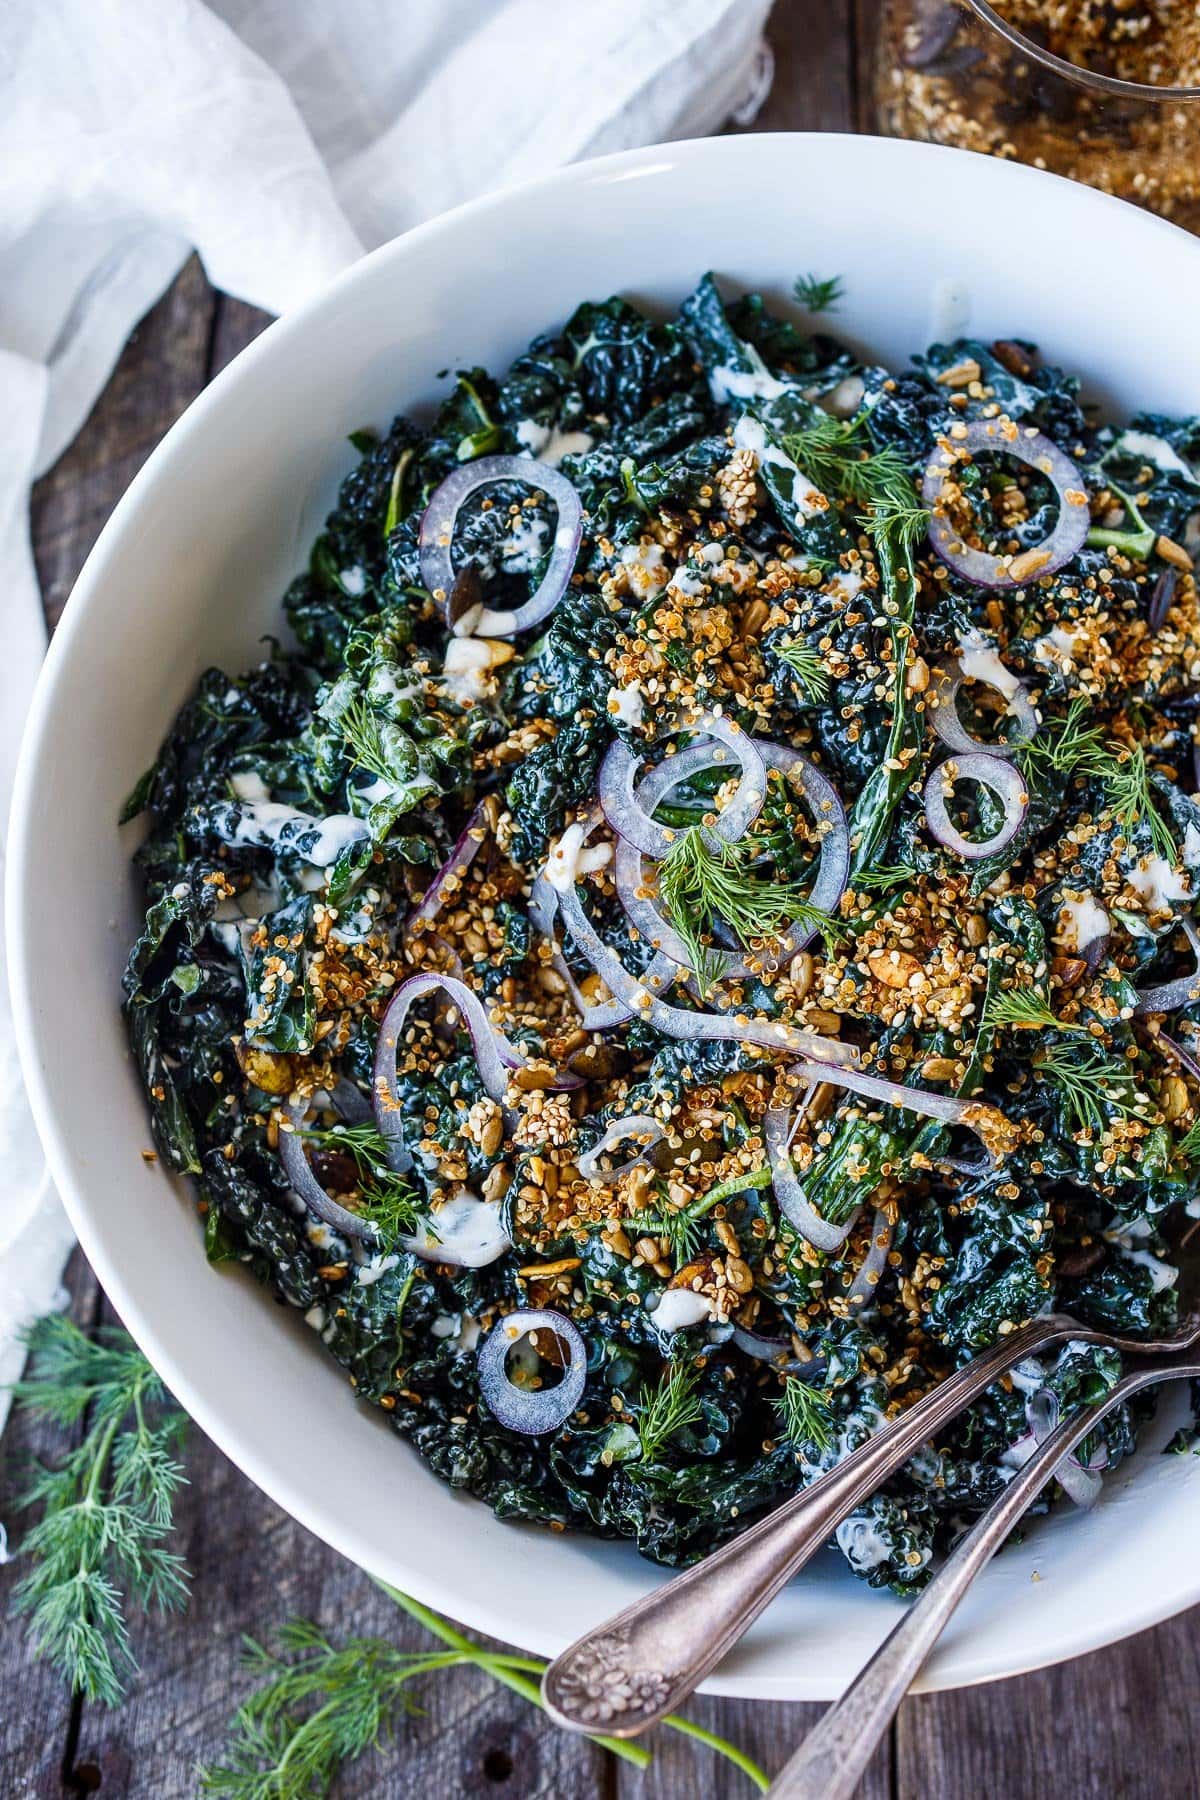 Full of healthy texture and flavor, this nutrient-dense Kale Salad with creamy buttermilk dressing and tamed red onions is sprinkled with an addicting crunchy salad topper.